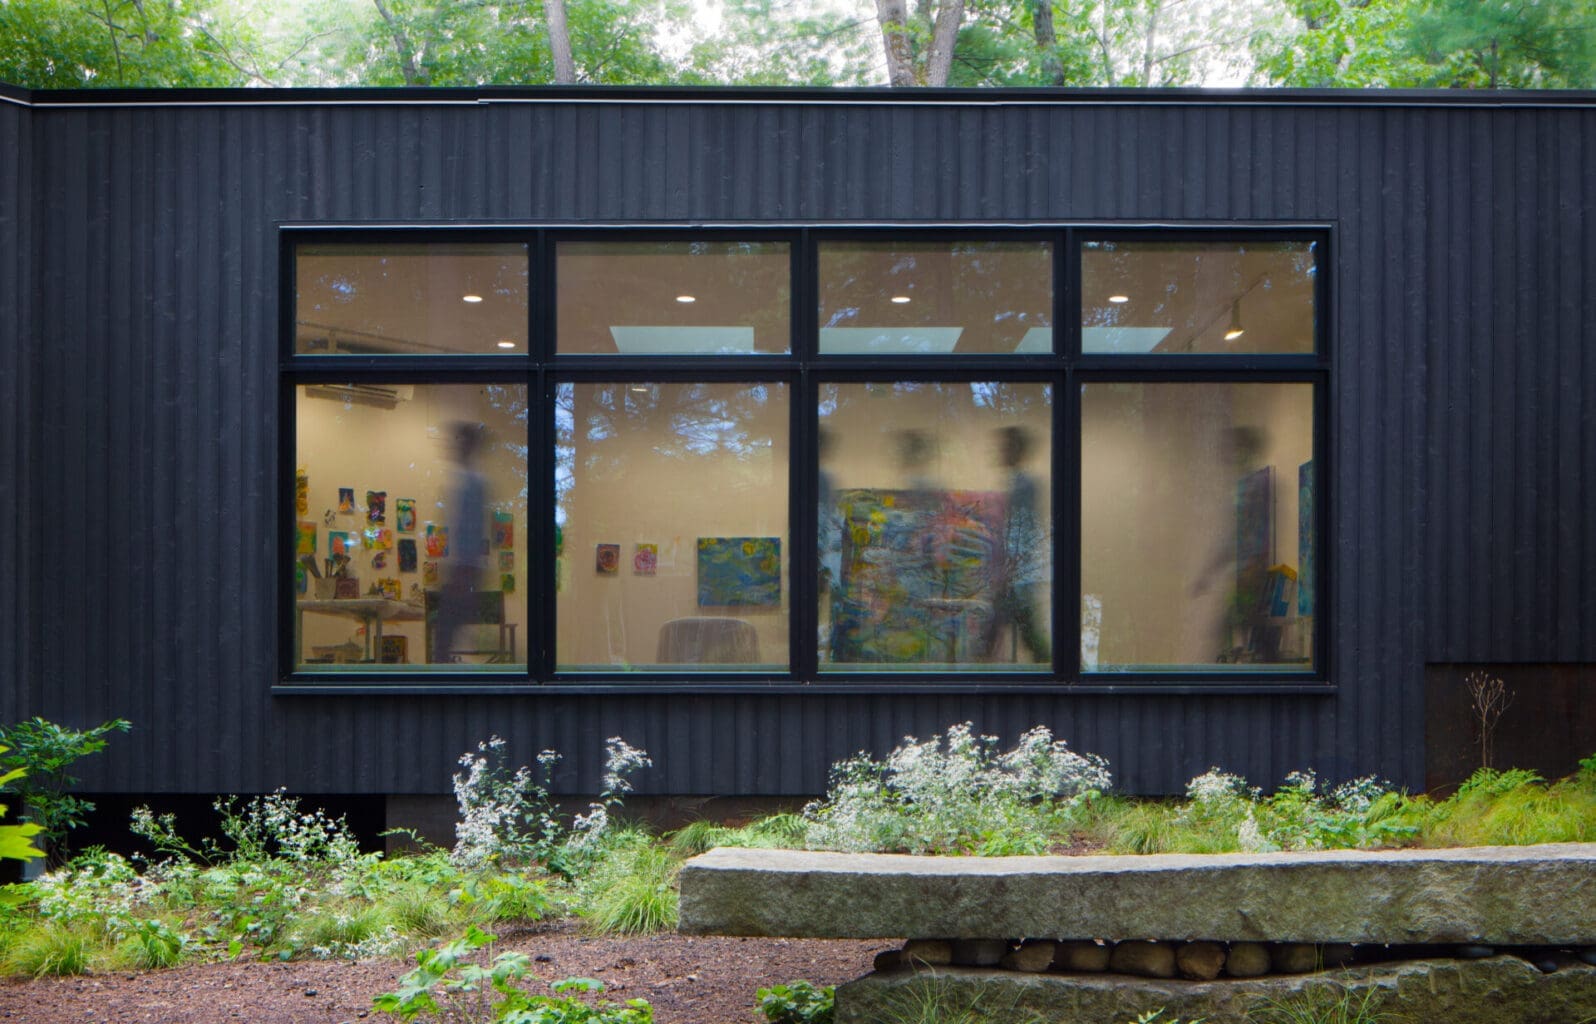 A photo of the outside of the gallery built from Japanese 'shou sugi ban' wood. Four windows show colorful paintings inside.